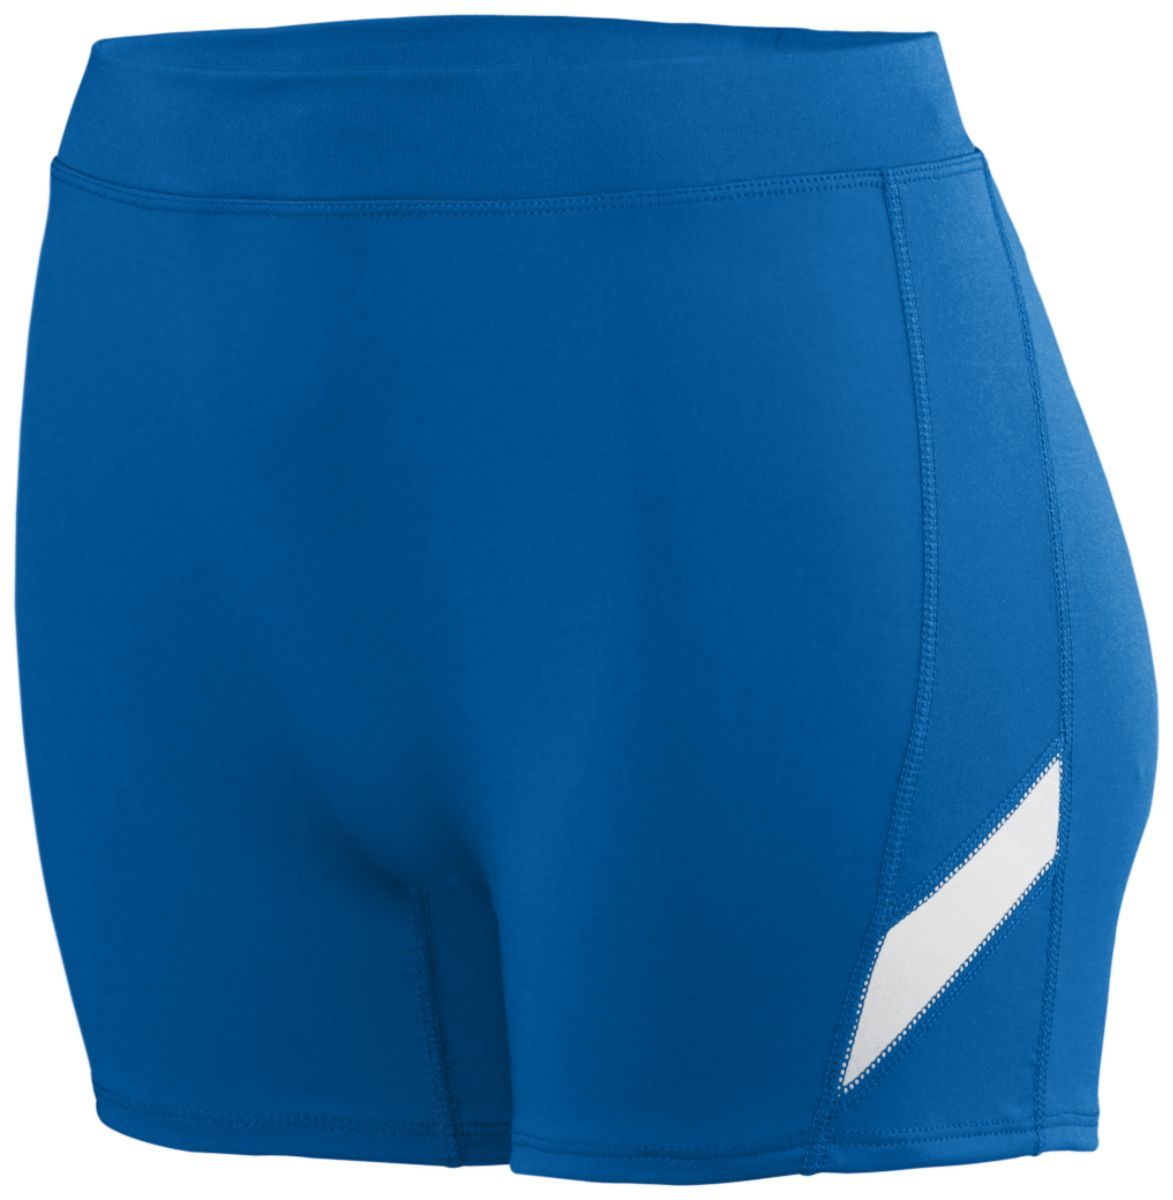 Augusta Sportswear Ladies Stride Shorts in Royal/White  -Part of the Ladies, Ladies-Shorts, Augusta-Products, Volleyball product lines at KanaleyCreations.com